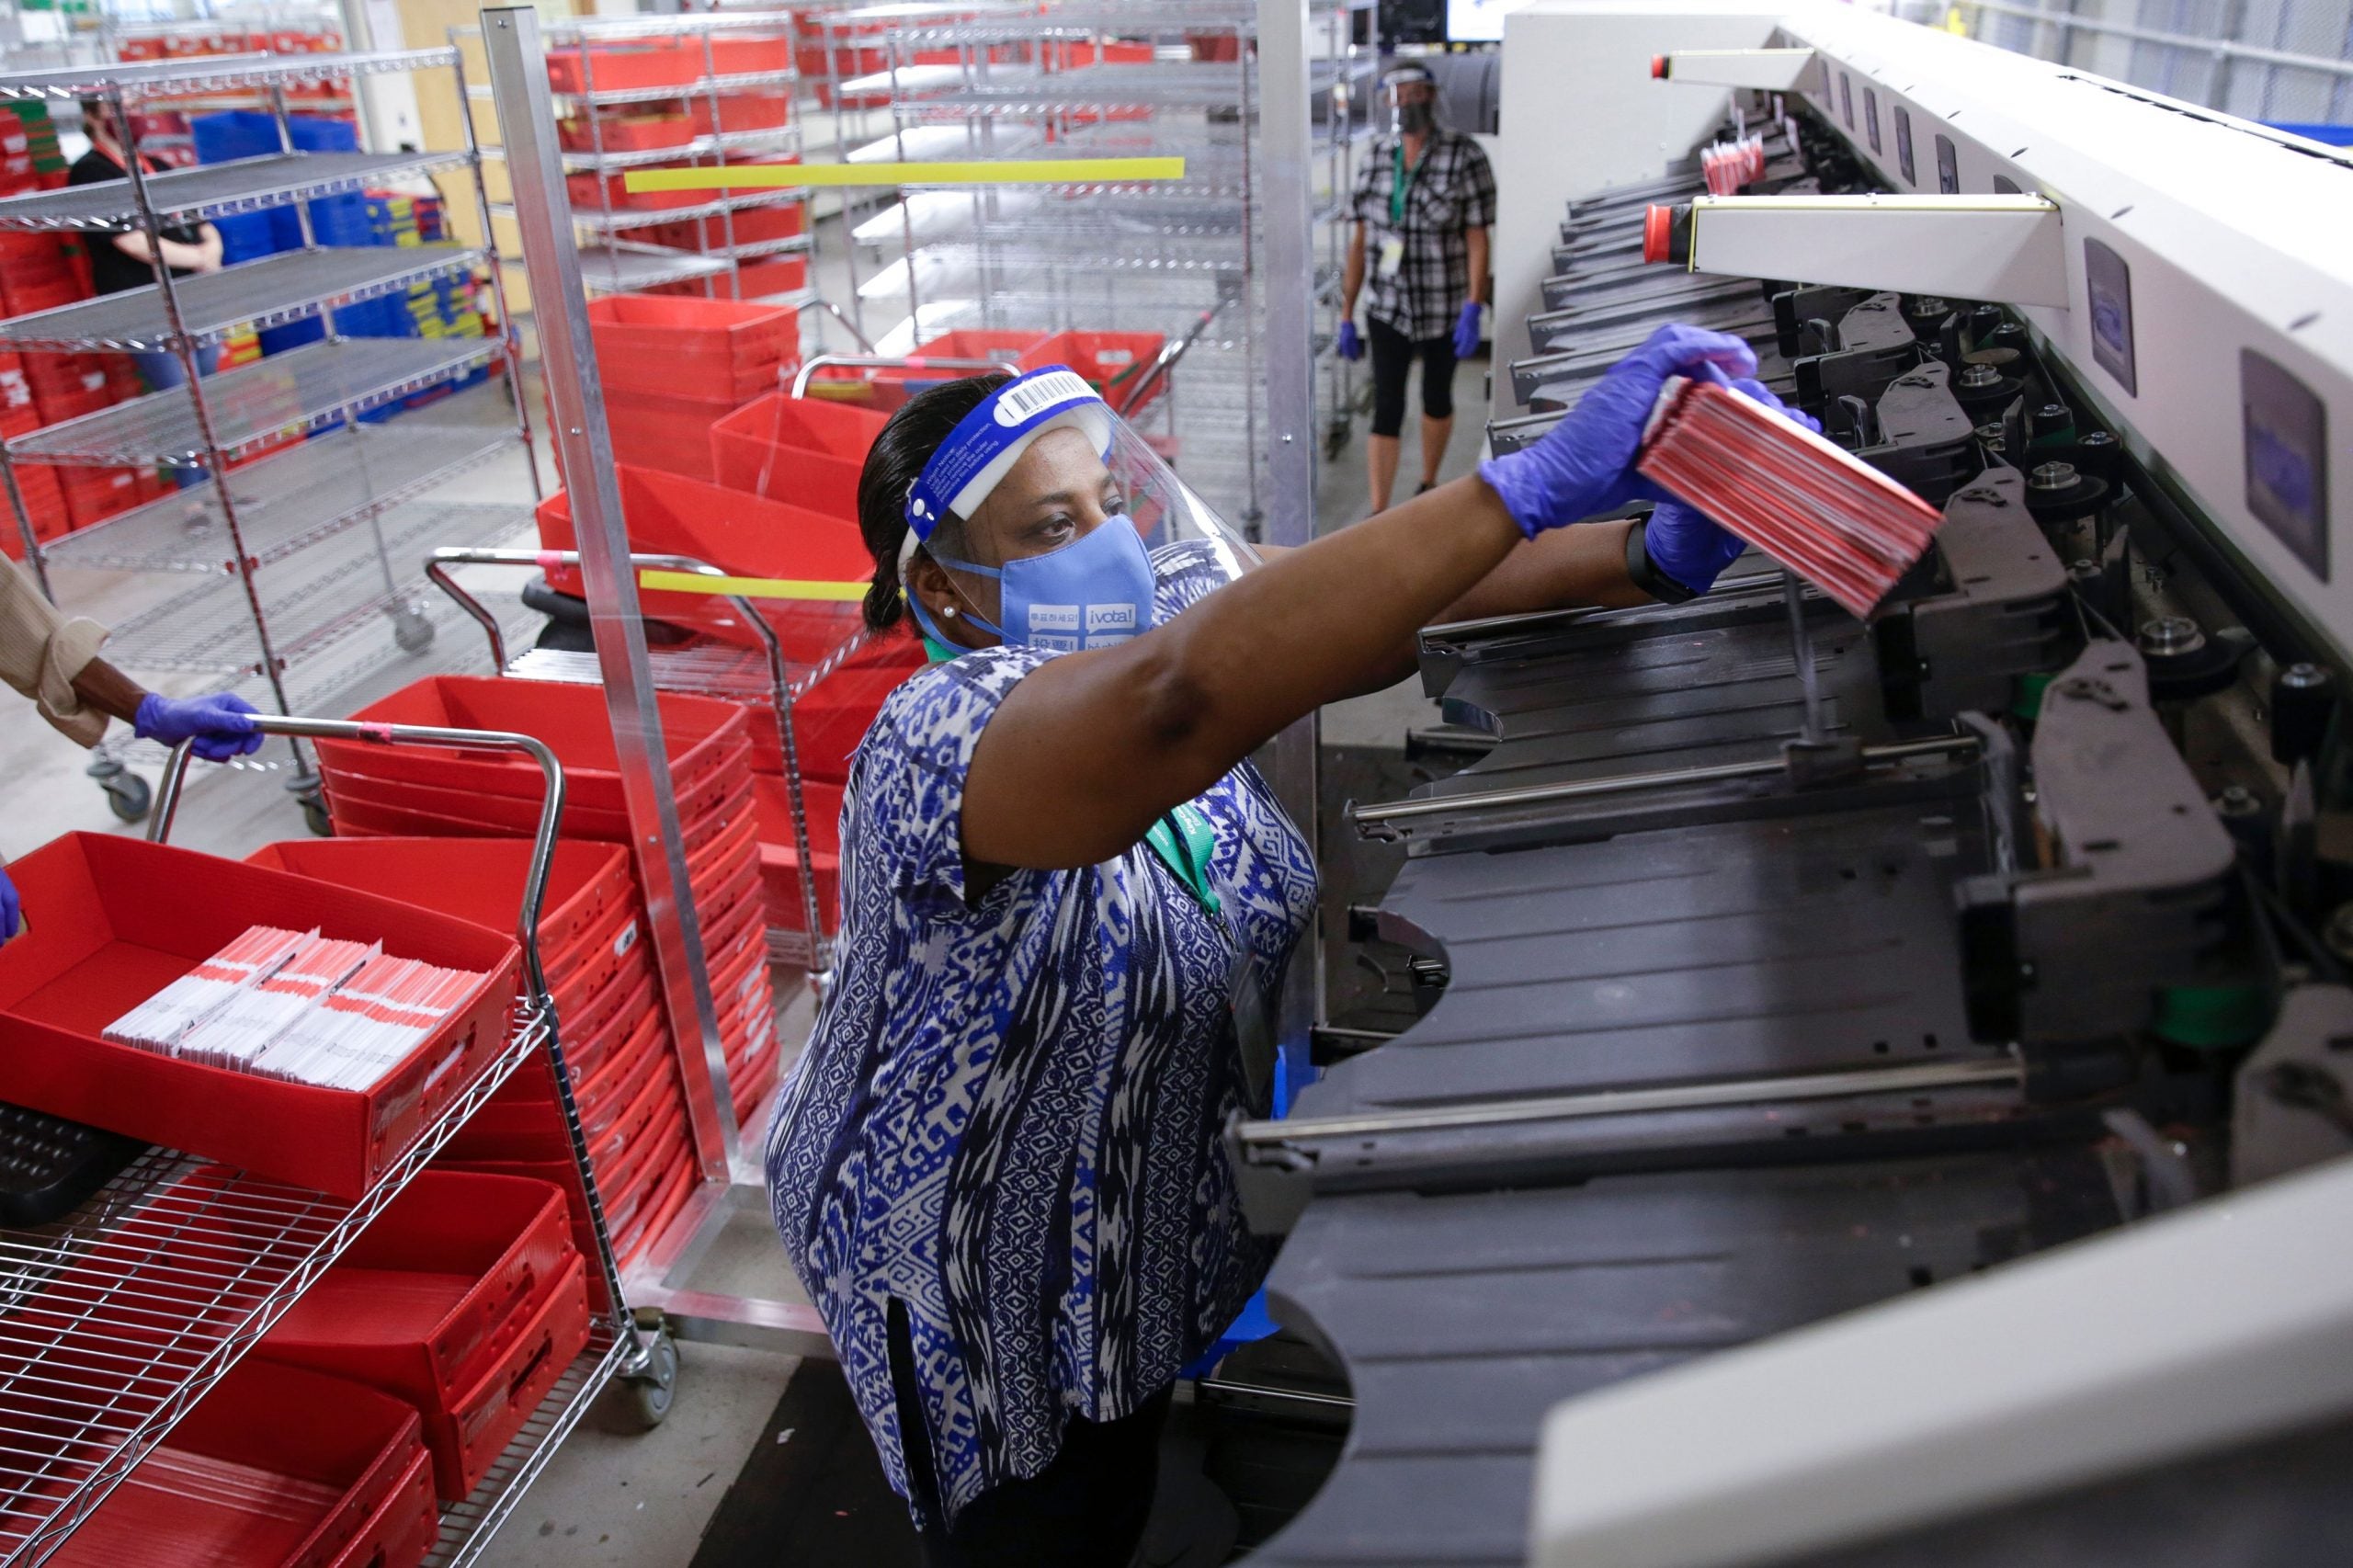 USPS Removing Some Mail Sorting Machines, Raising Concerns Ahead Of Elections